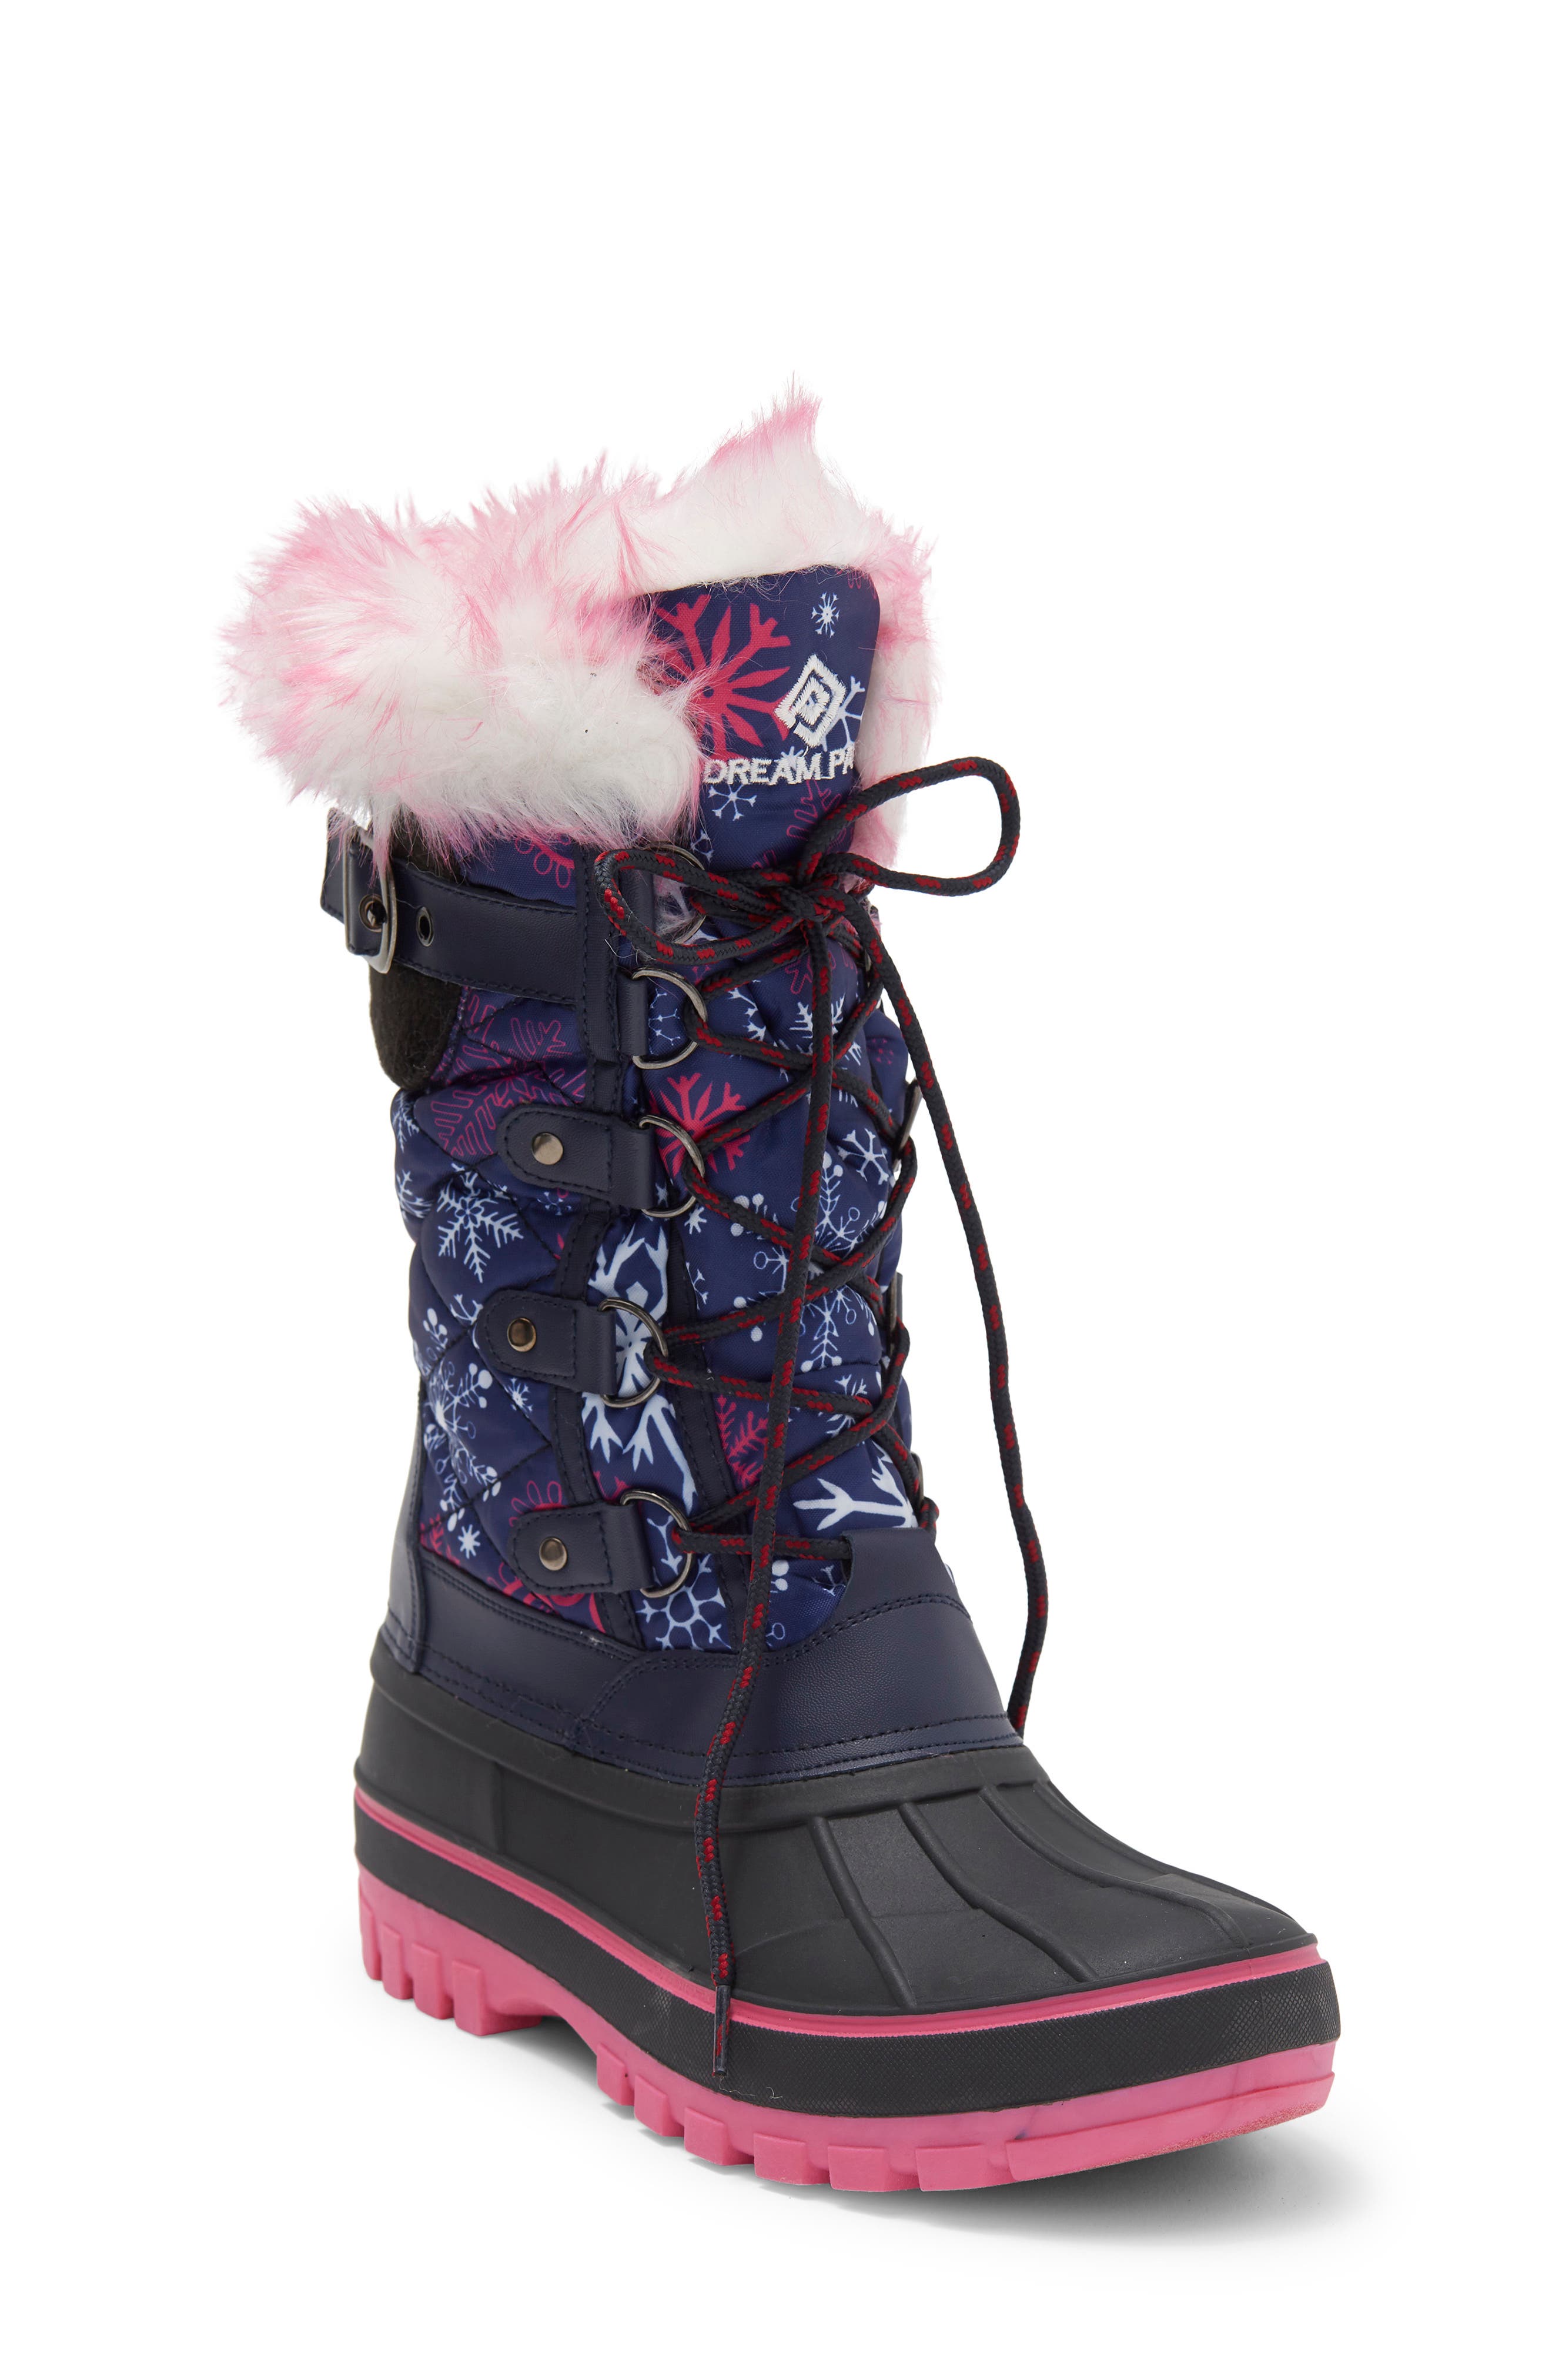 Kids' Kriver-1 Faux Fur Lined Snow Boot DREAM PAIRS